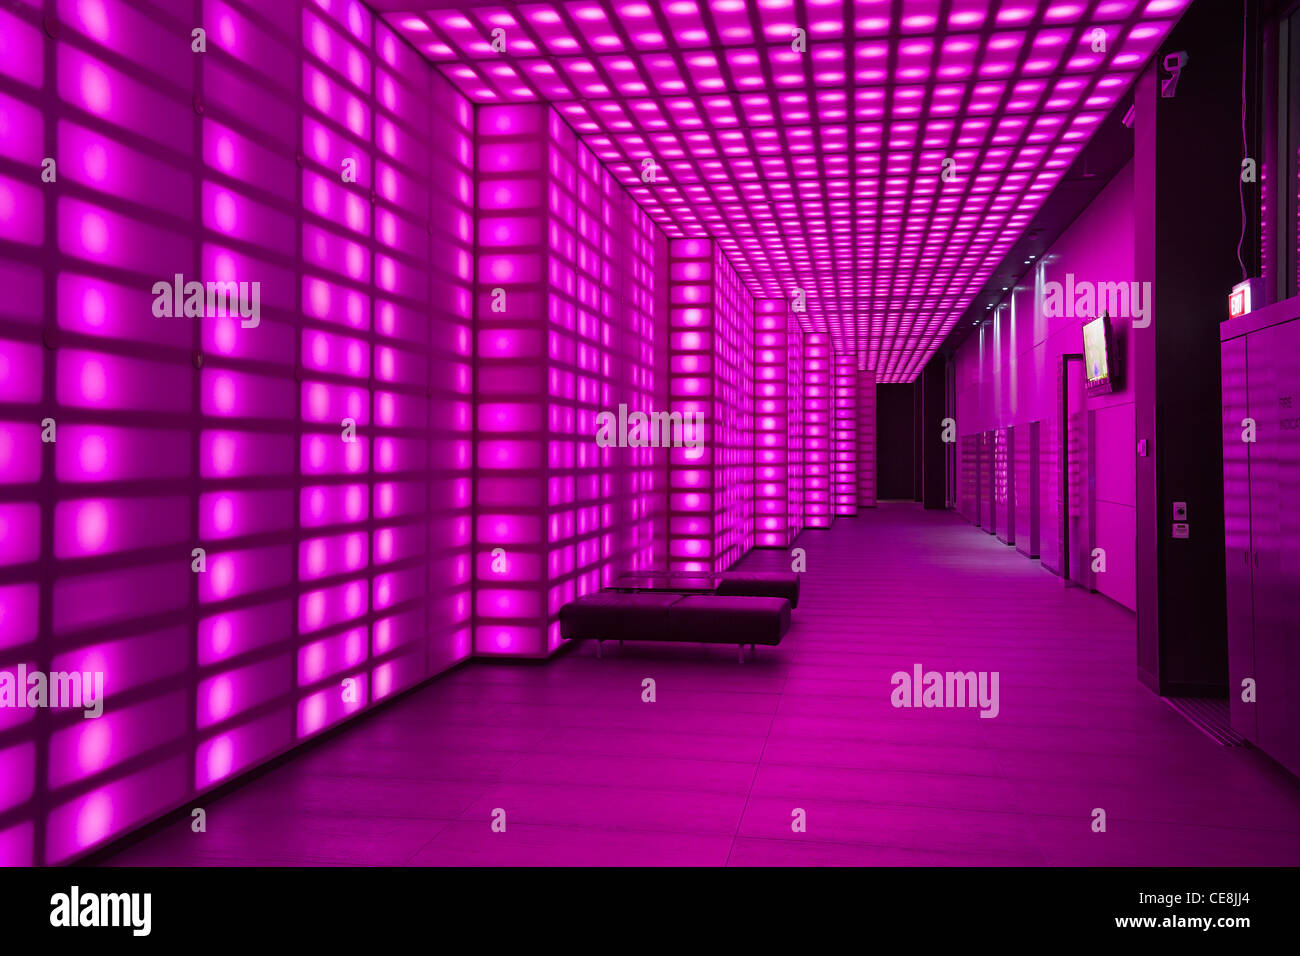 Pink lighting wall lobby / entrance room to night club or disco. Stock Photo